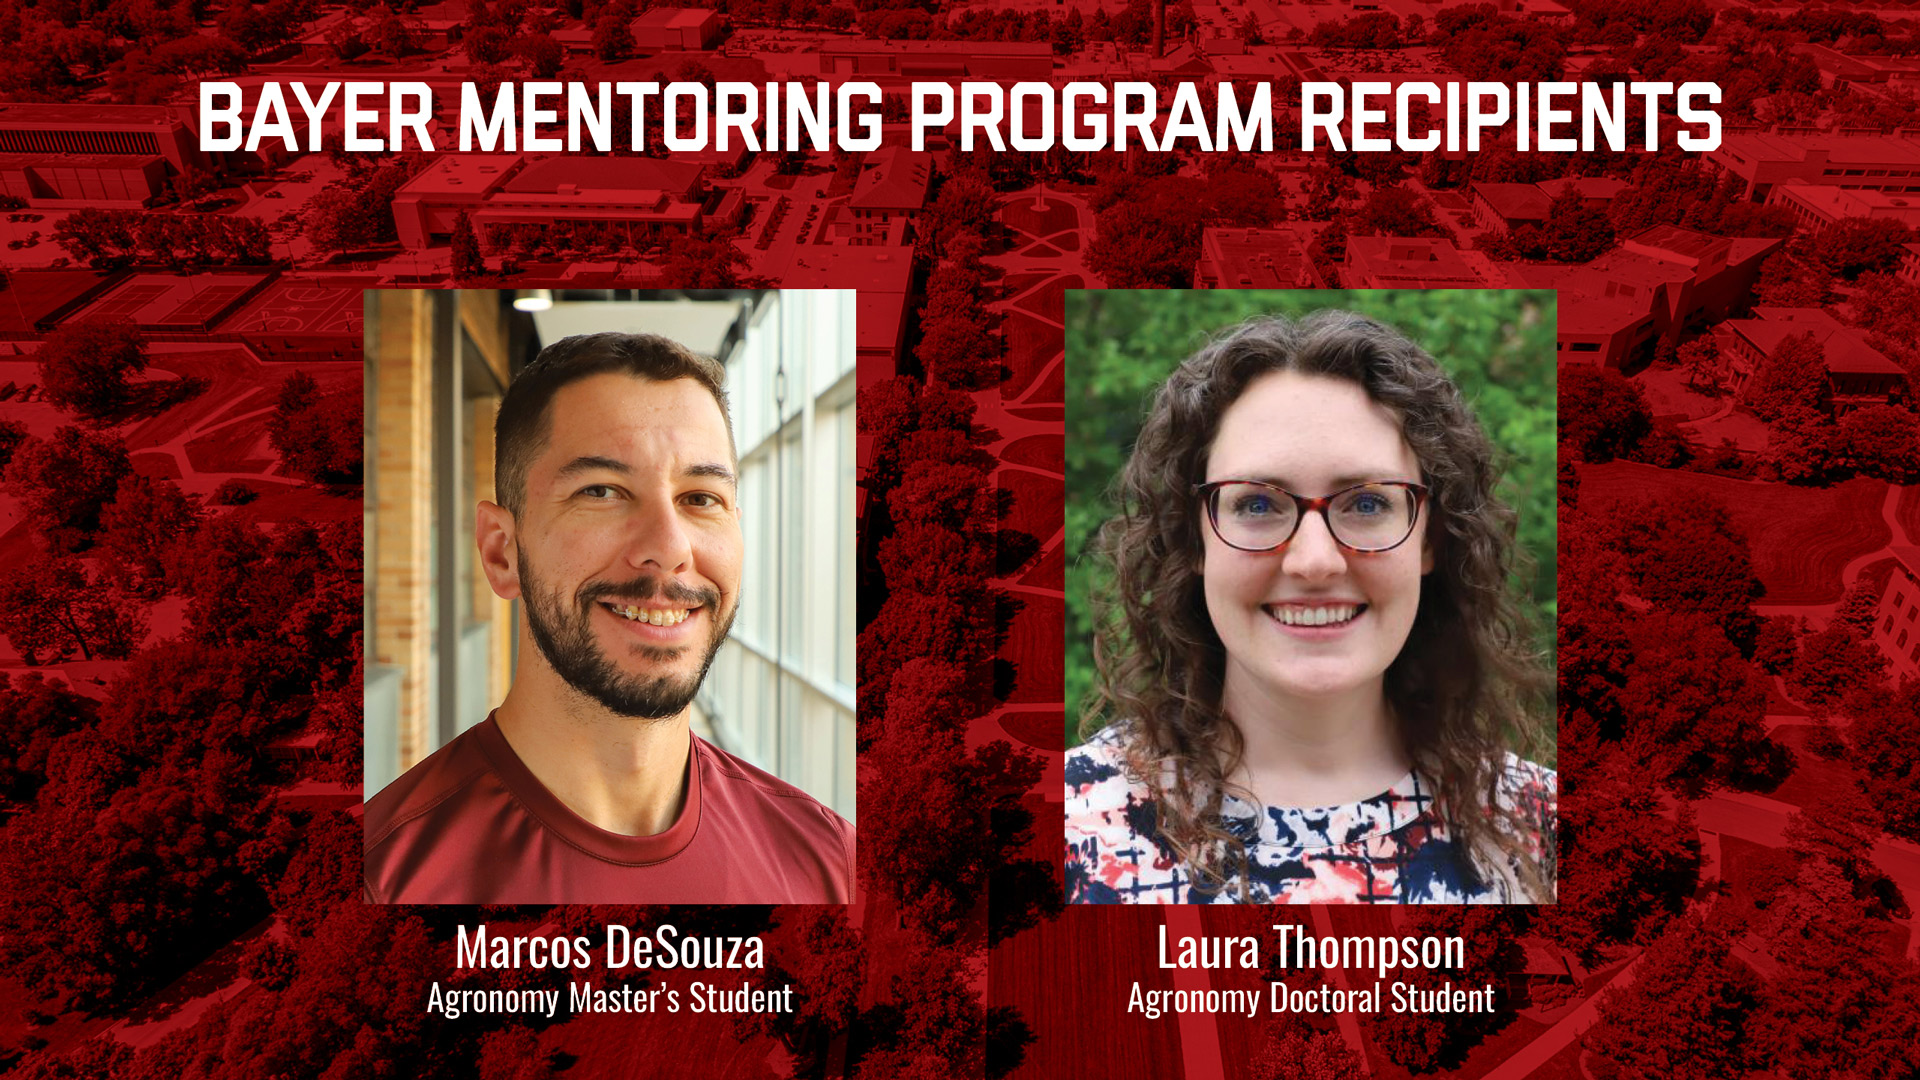 Marcos DeSouza and Laura Thompson, Department of Agronomy and Horticulture graduate students, were selected for the Bayer Mentoring Program.